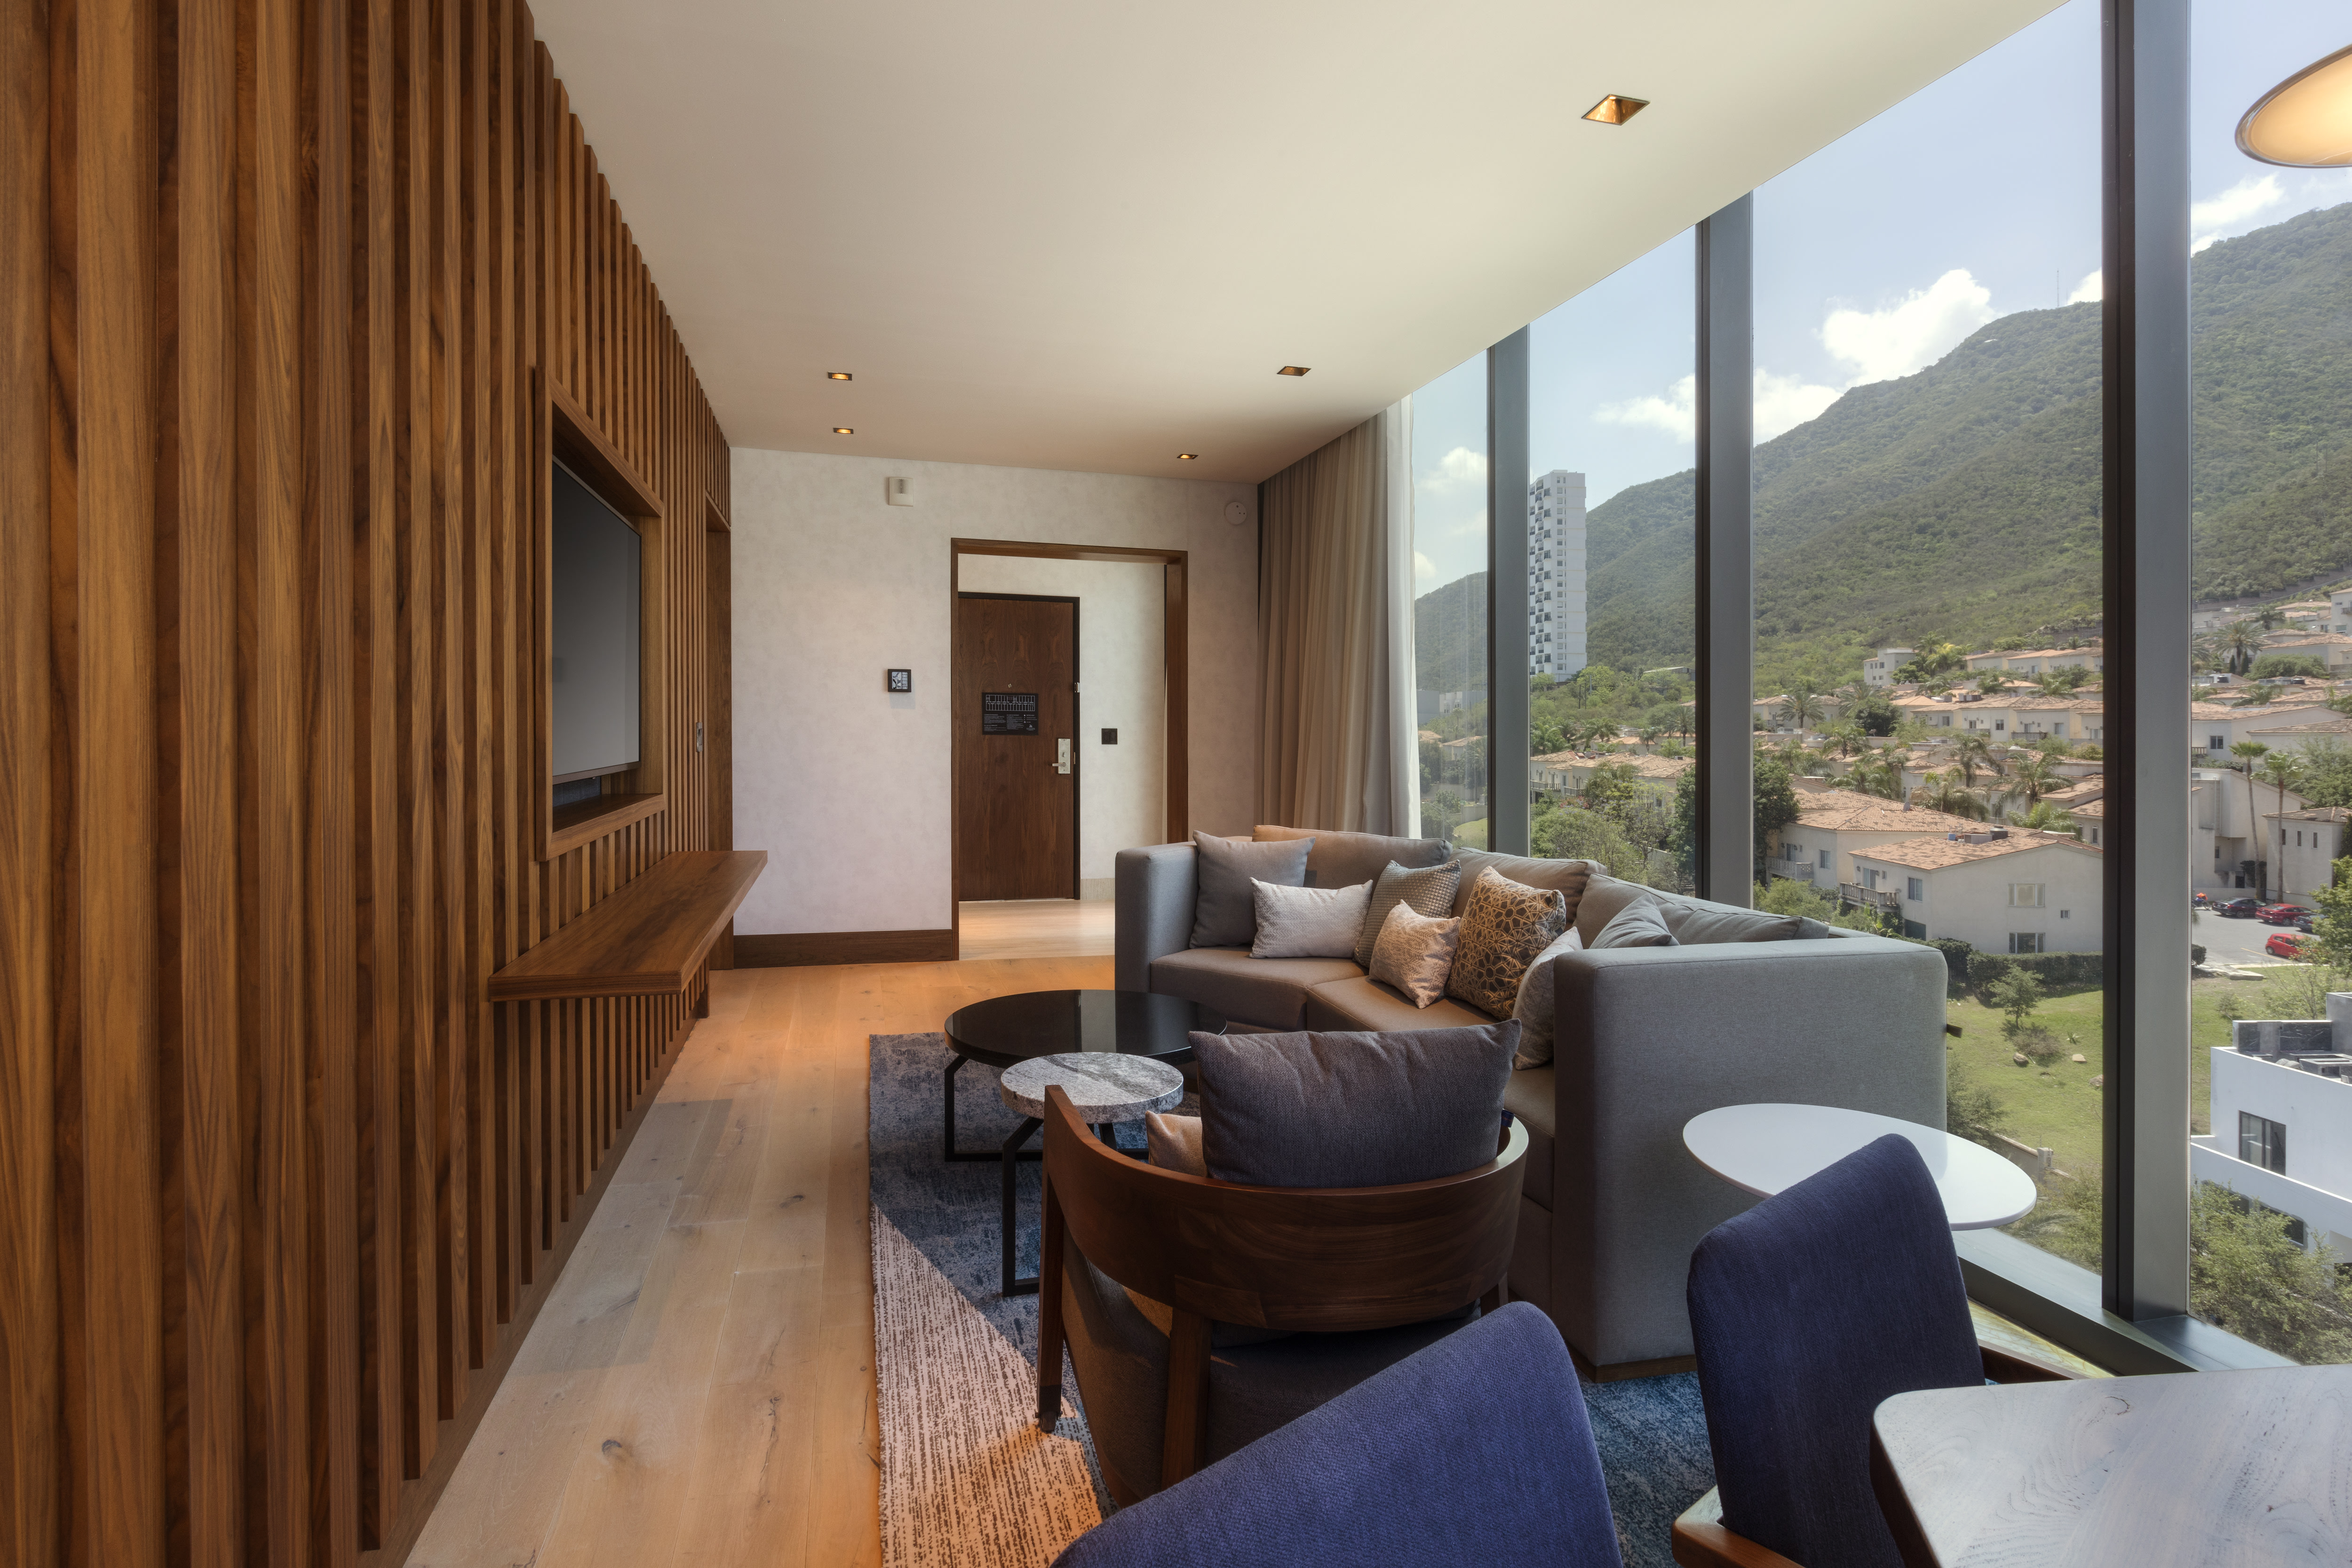 Suite living room with sofa, table and chairs, TV, and floor-to-ceiling windows with views of mountains and city